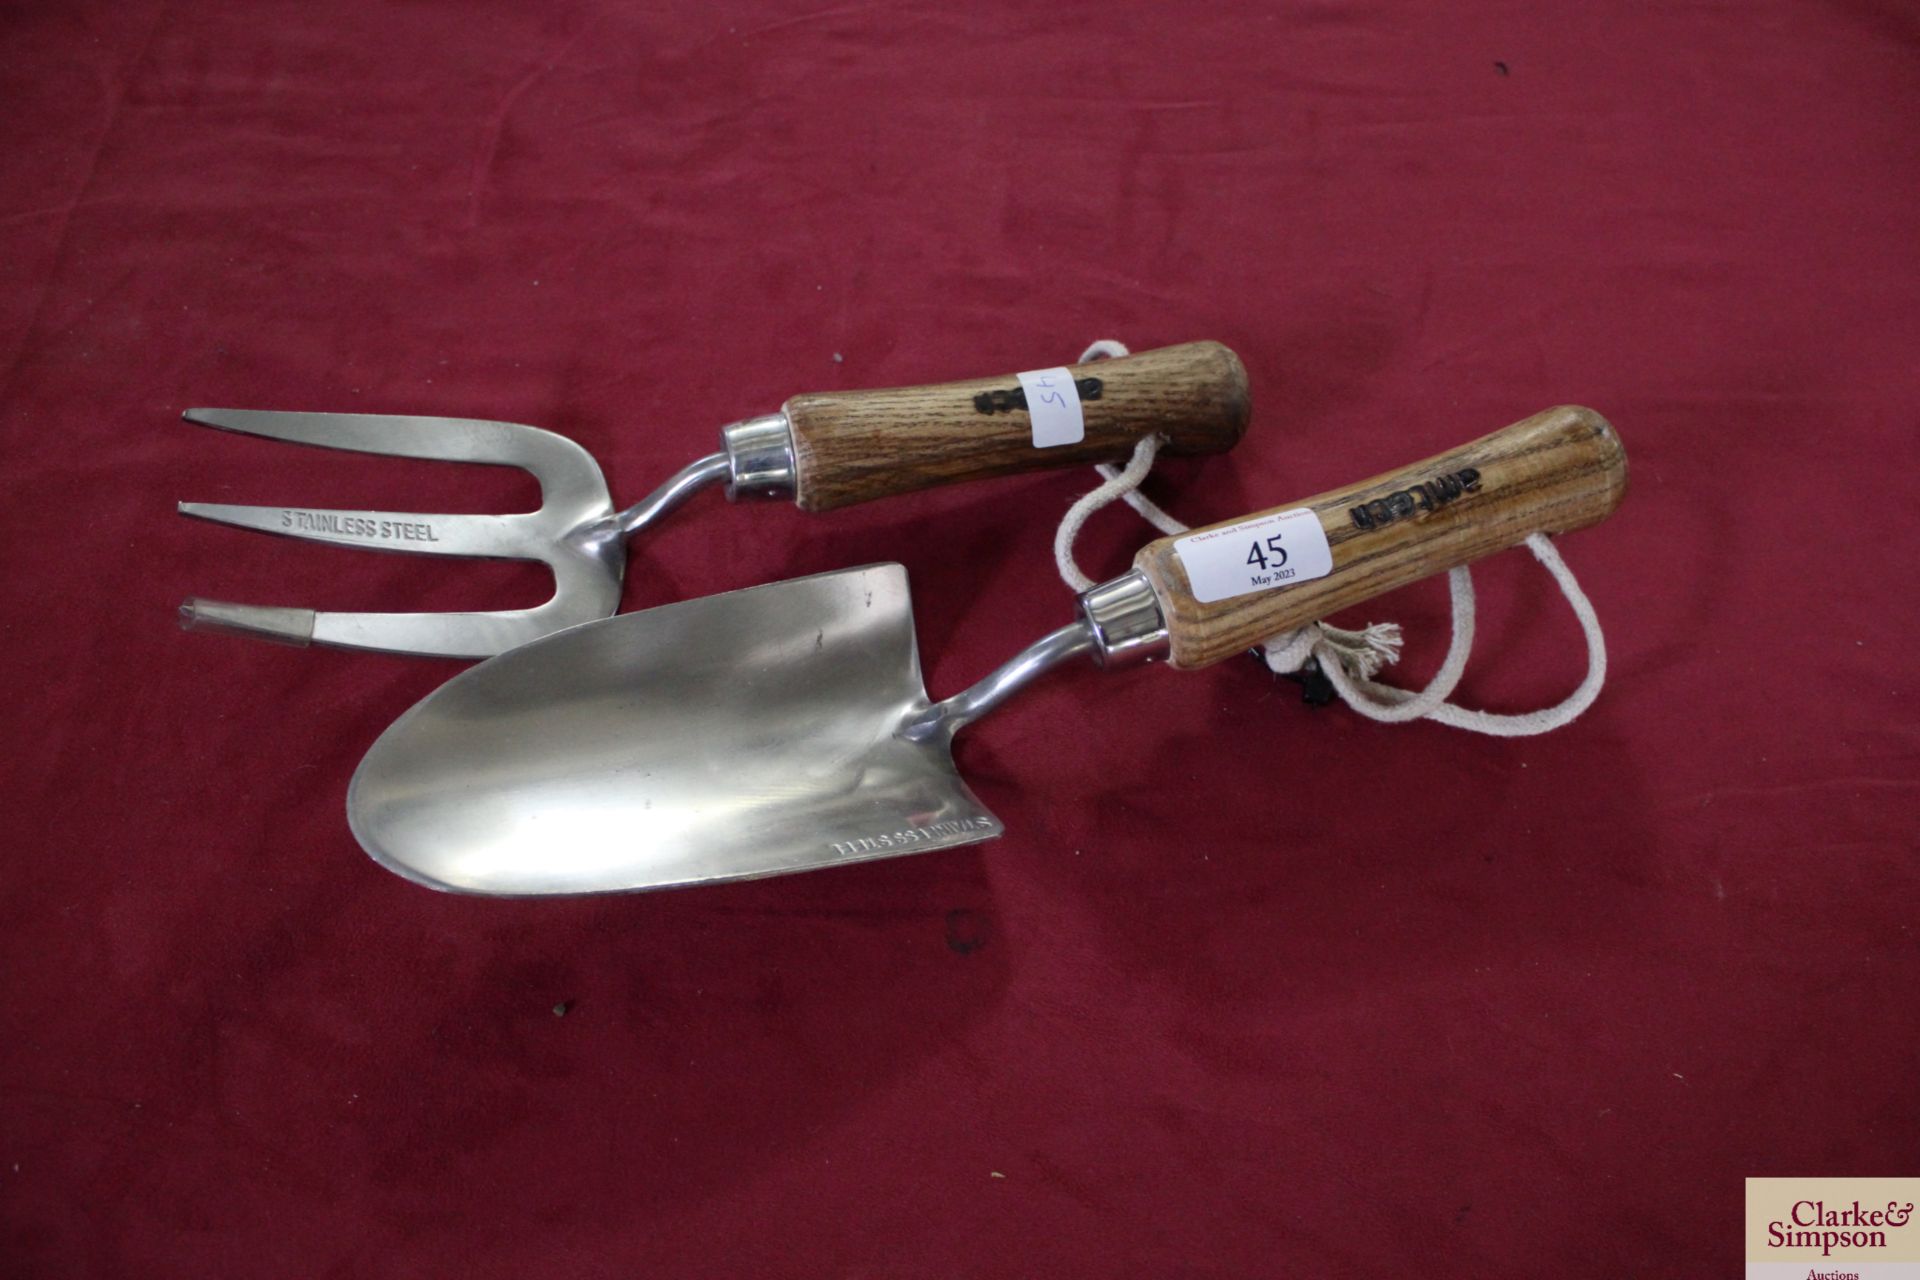 Stainless steel hand trowel and fork. V